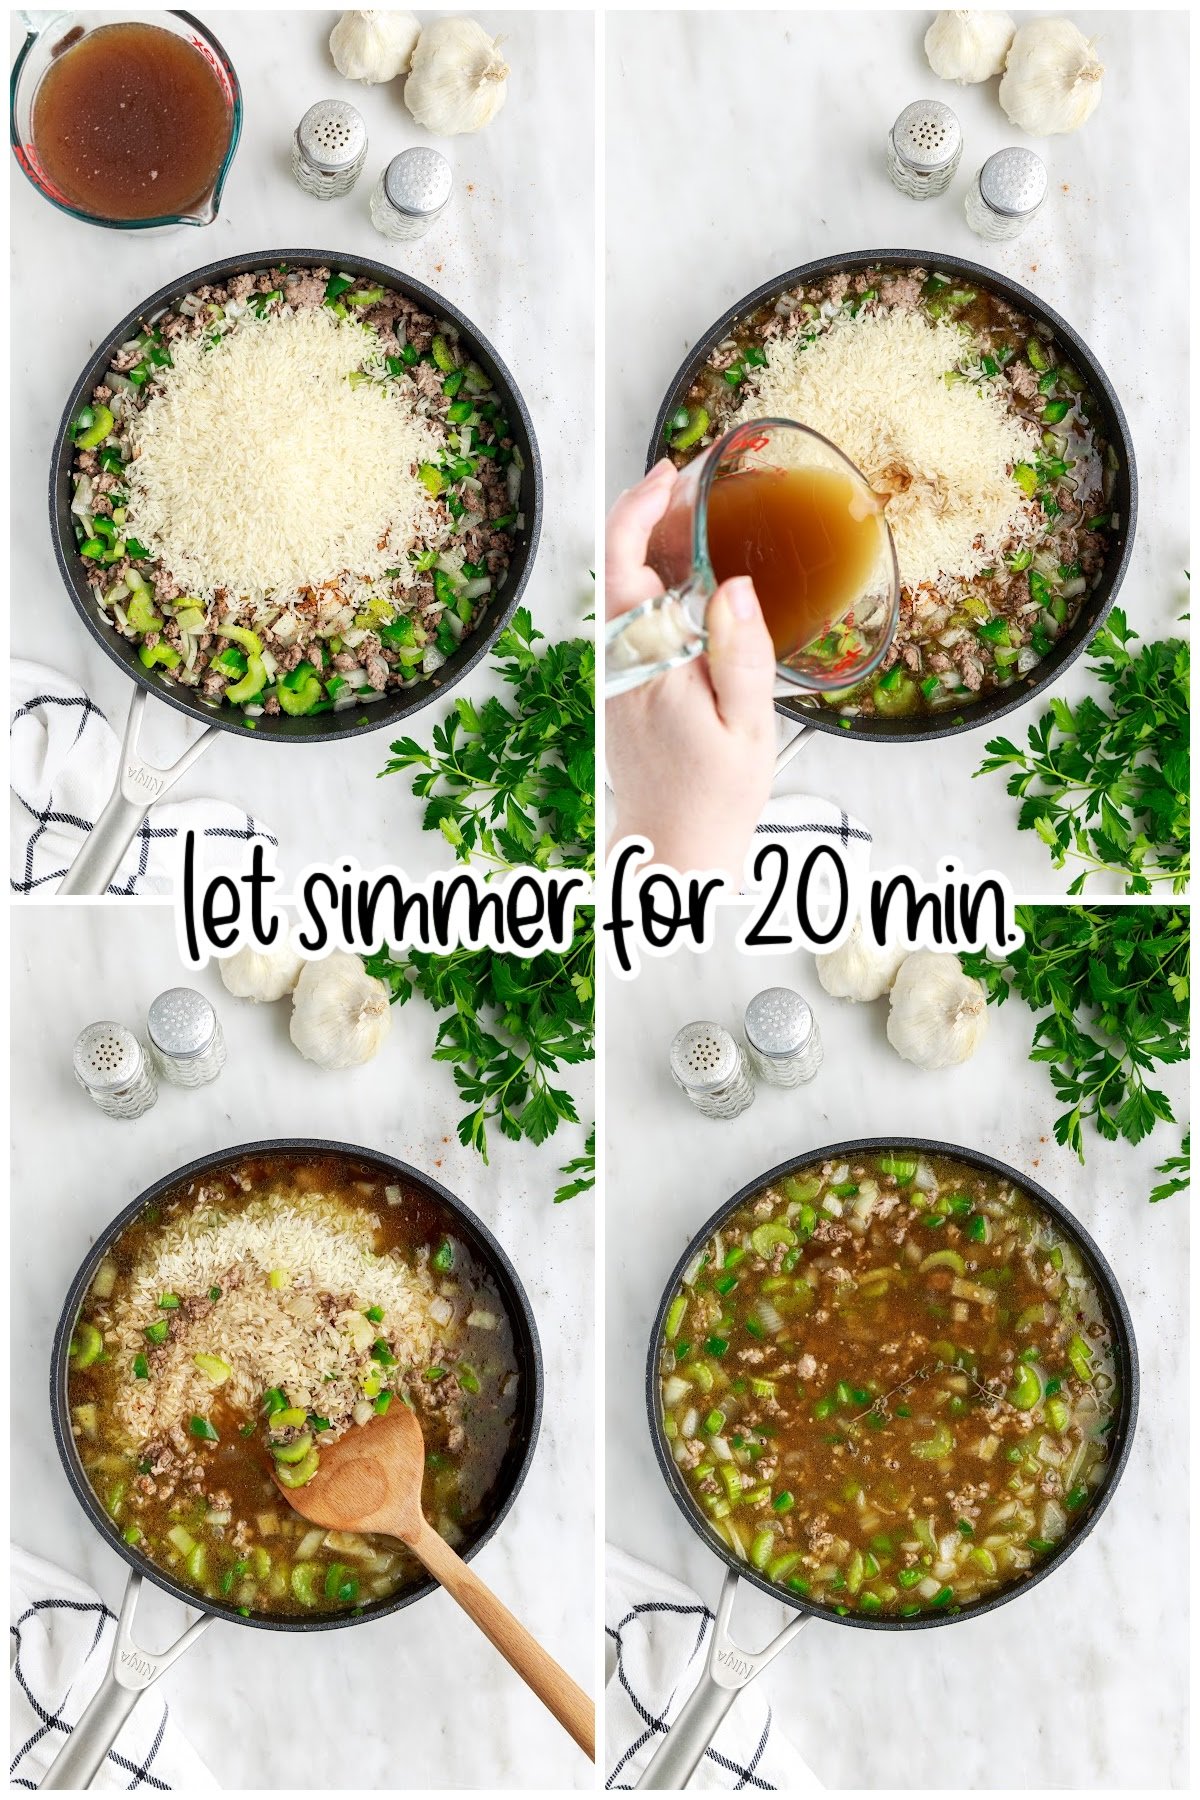 Adding uncooked rice and broth to the skillet and text overlay "let simmer for 20 min."